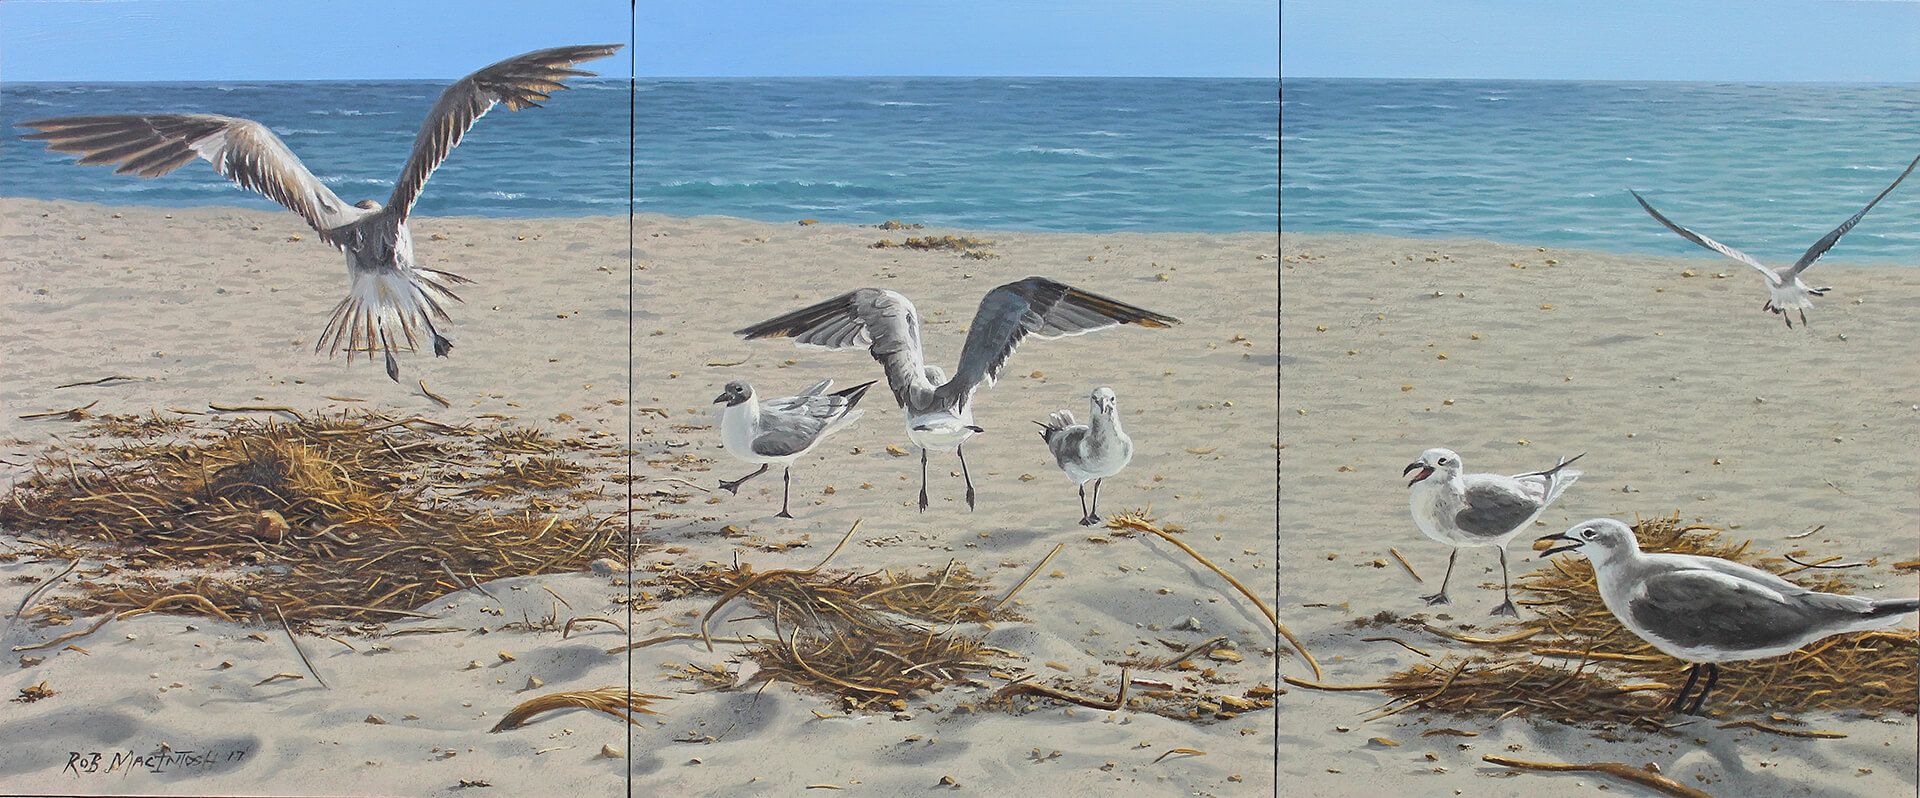 Photorealistic painting of seagulls fighting over food